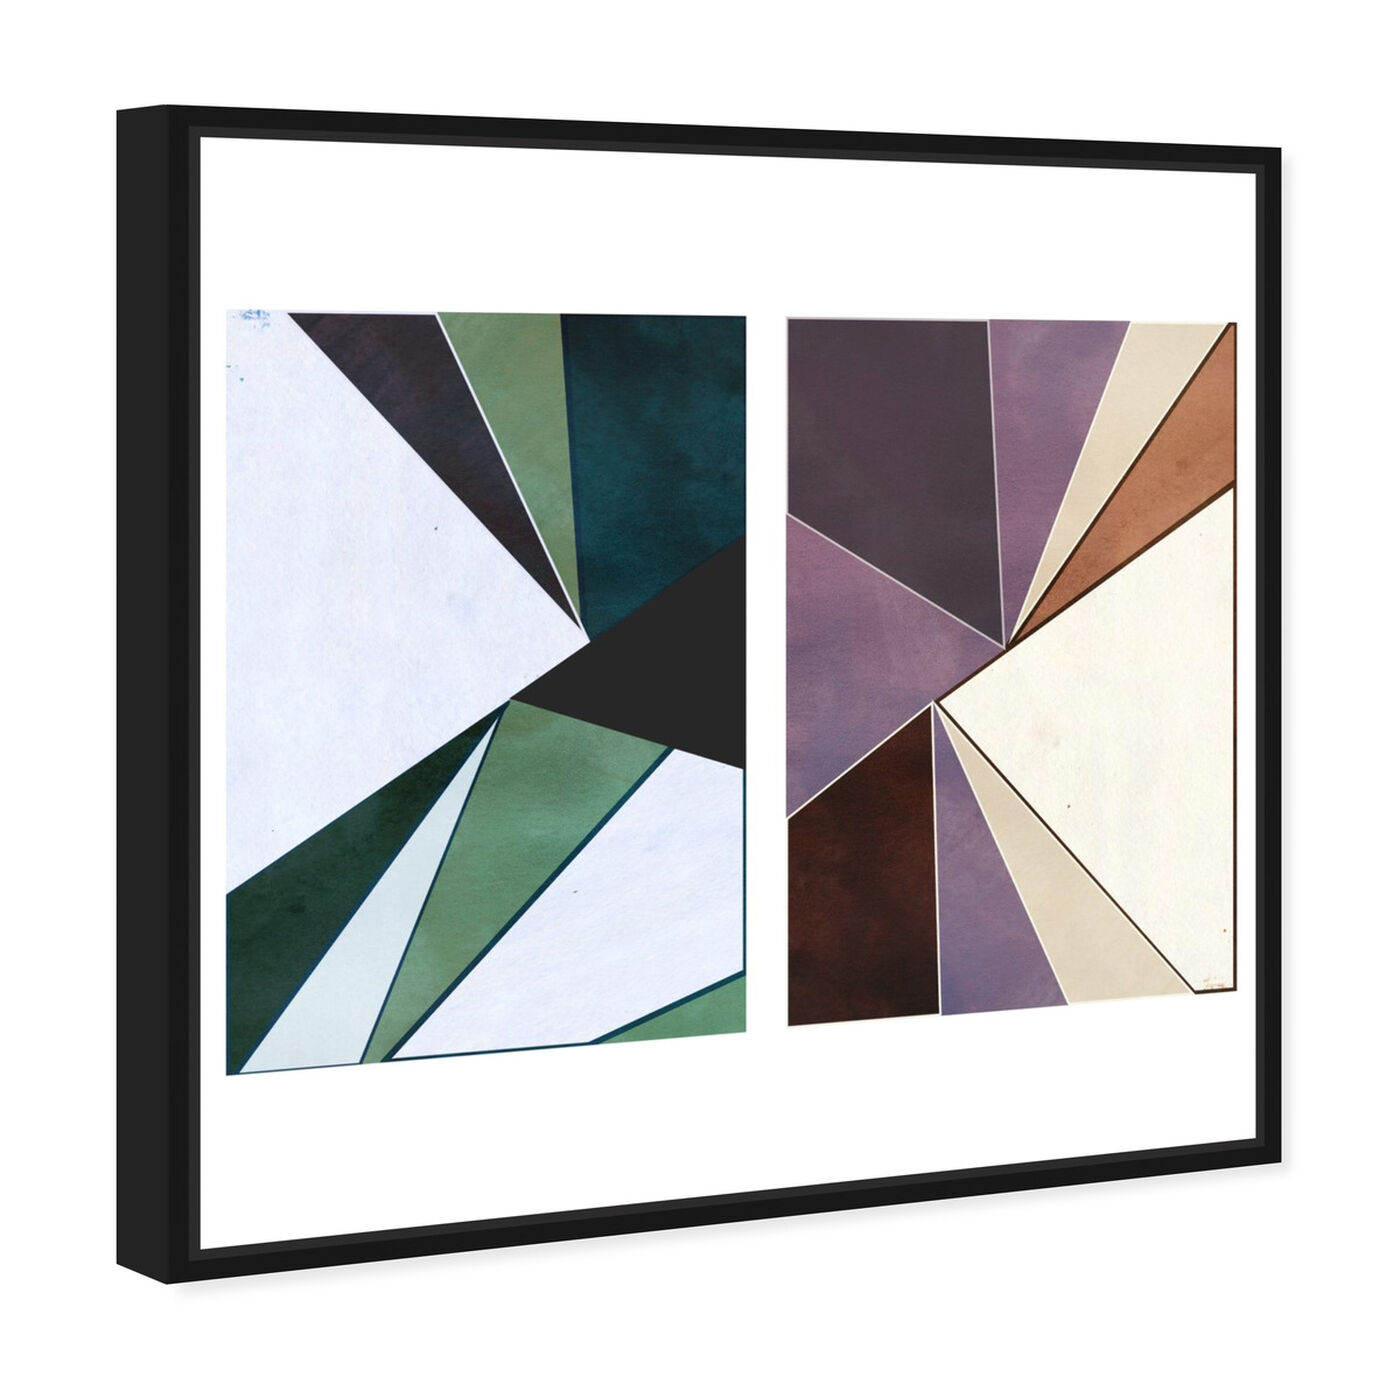 Angled view of Deco set of 2 featuring abstract and geometric art.